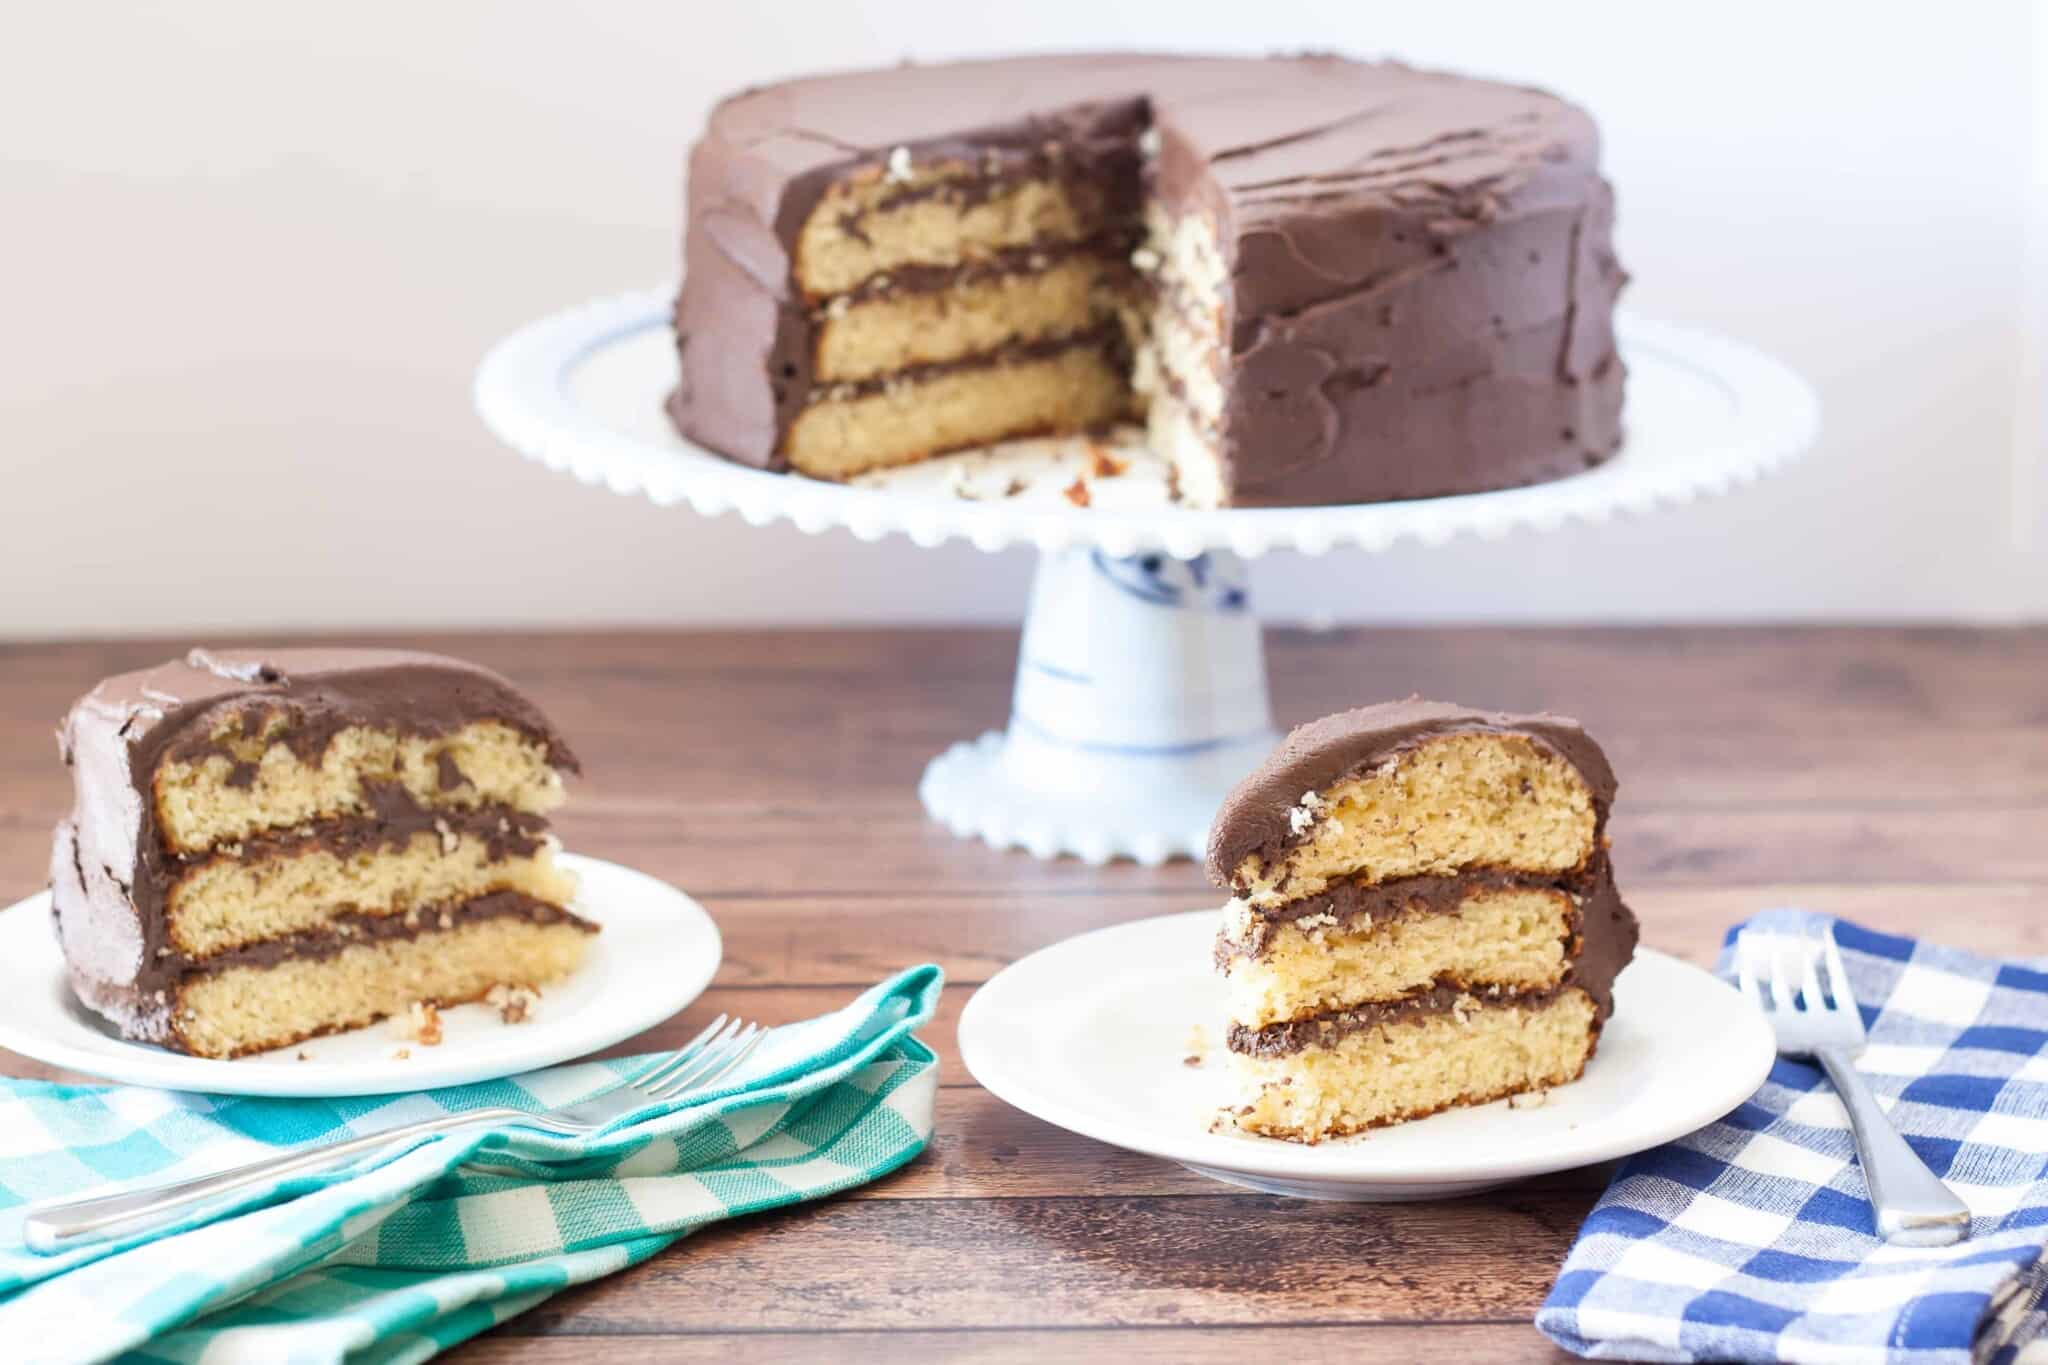 Gluten Free Yellow Cake with Chocolate Fudge Frosting has a moist and tender crumb with creamy chocolate fudge frosting. Vegan and Dairy Free options.